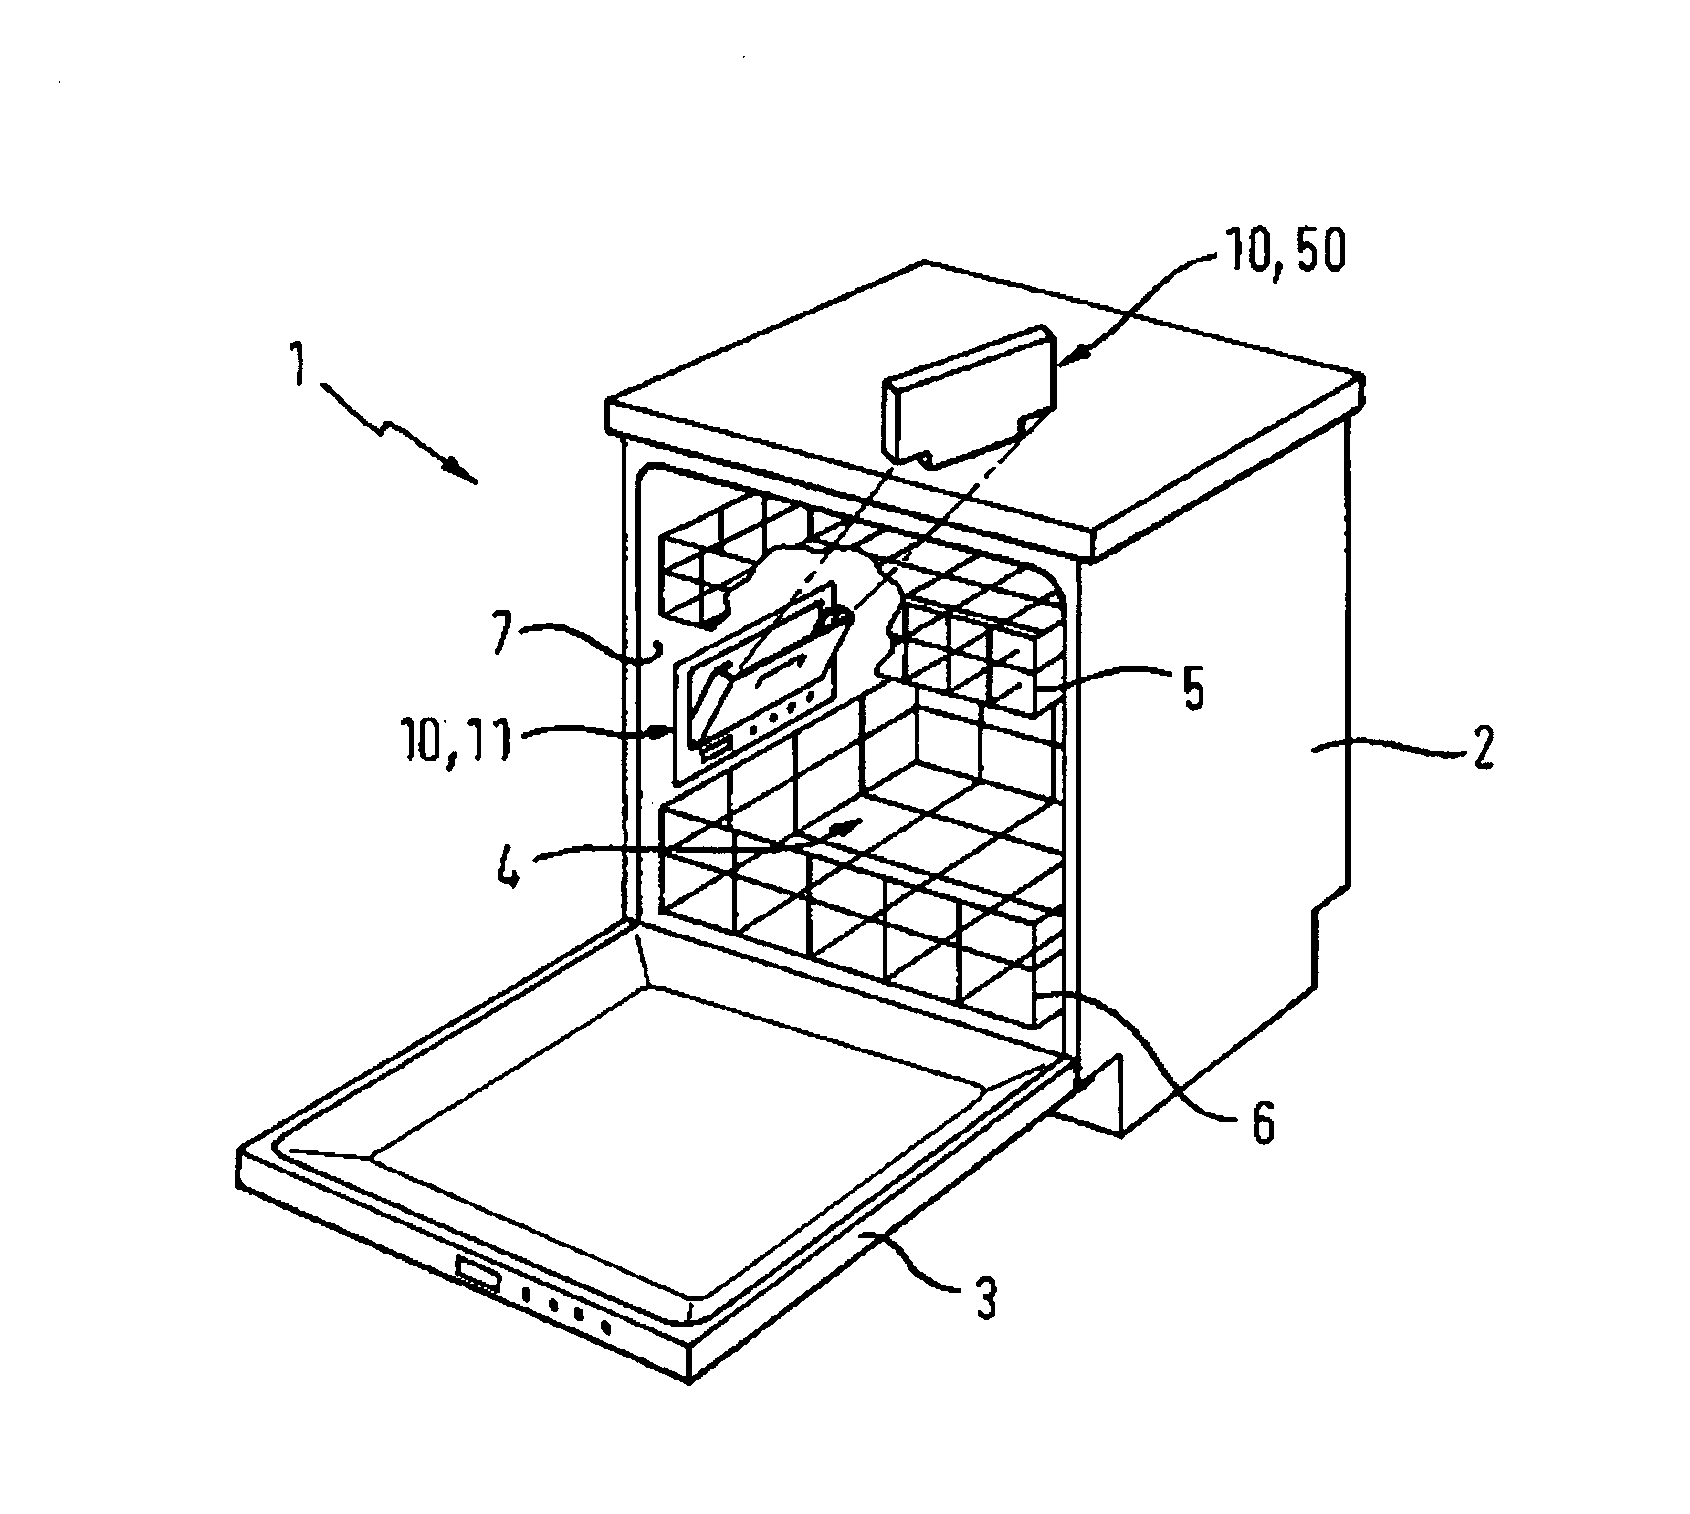 Water-conducting domestic appliance comprising a detergent dosing system and cartridge therefor